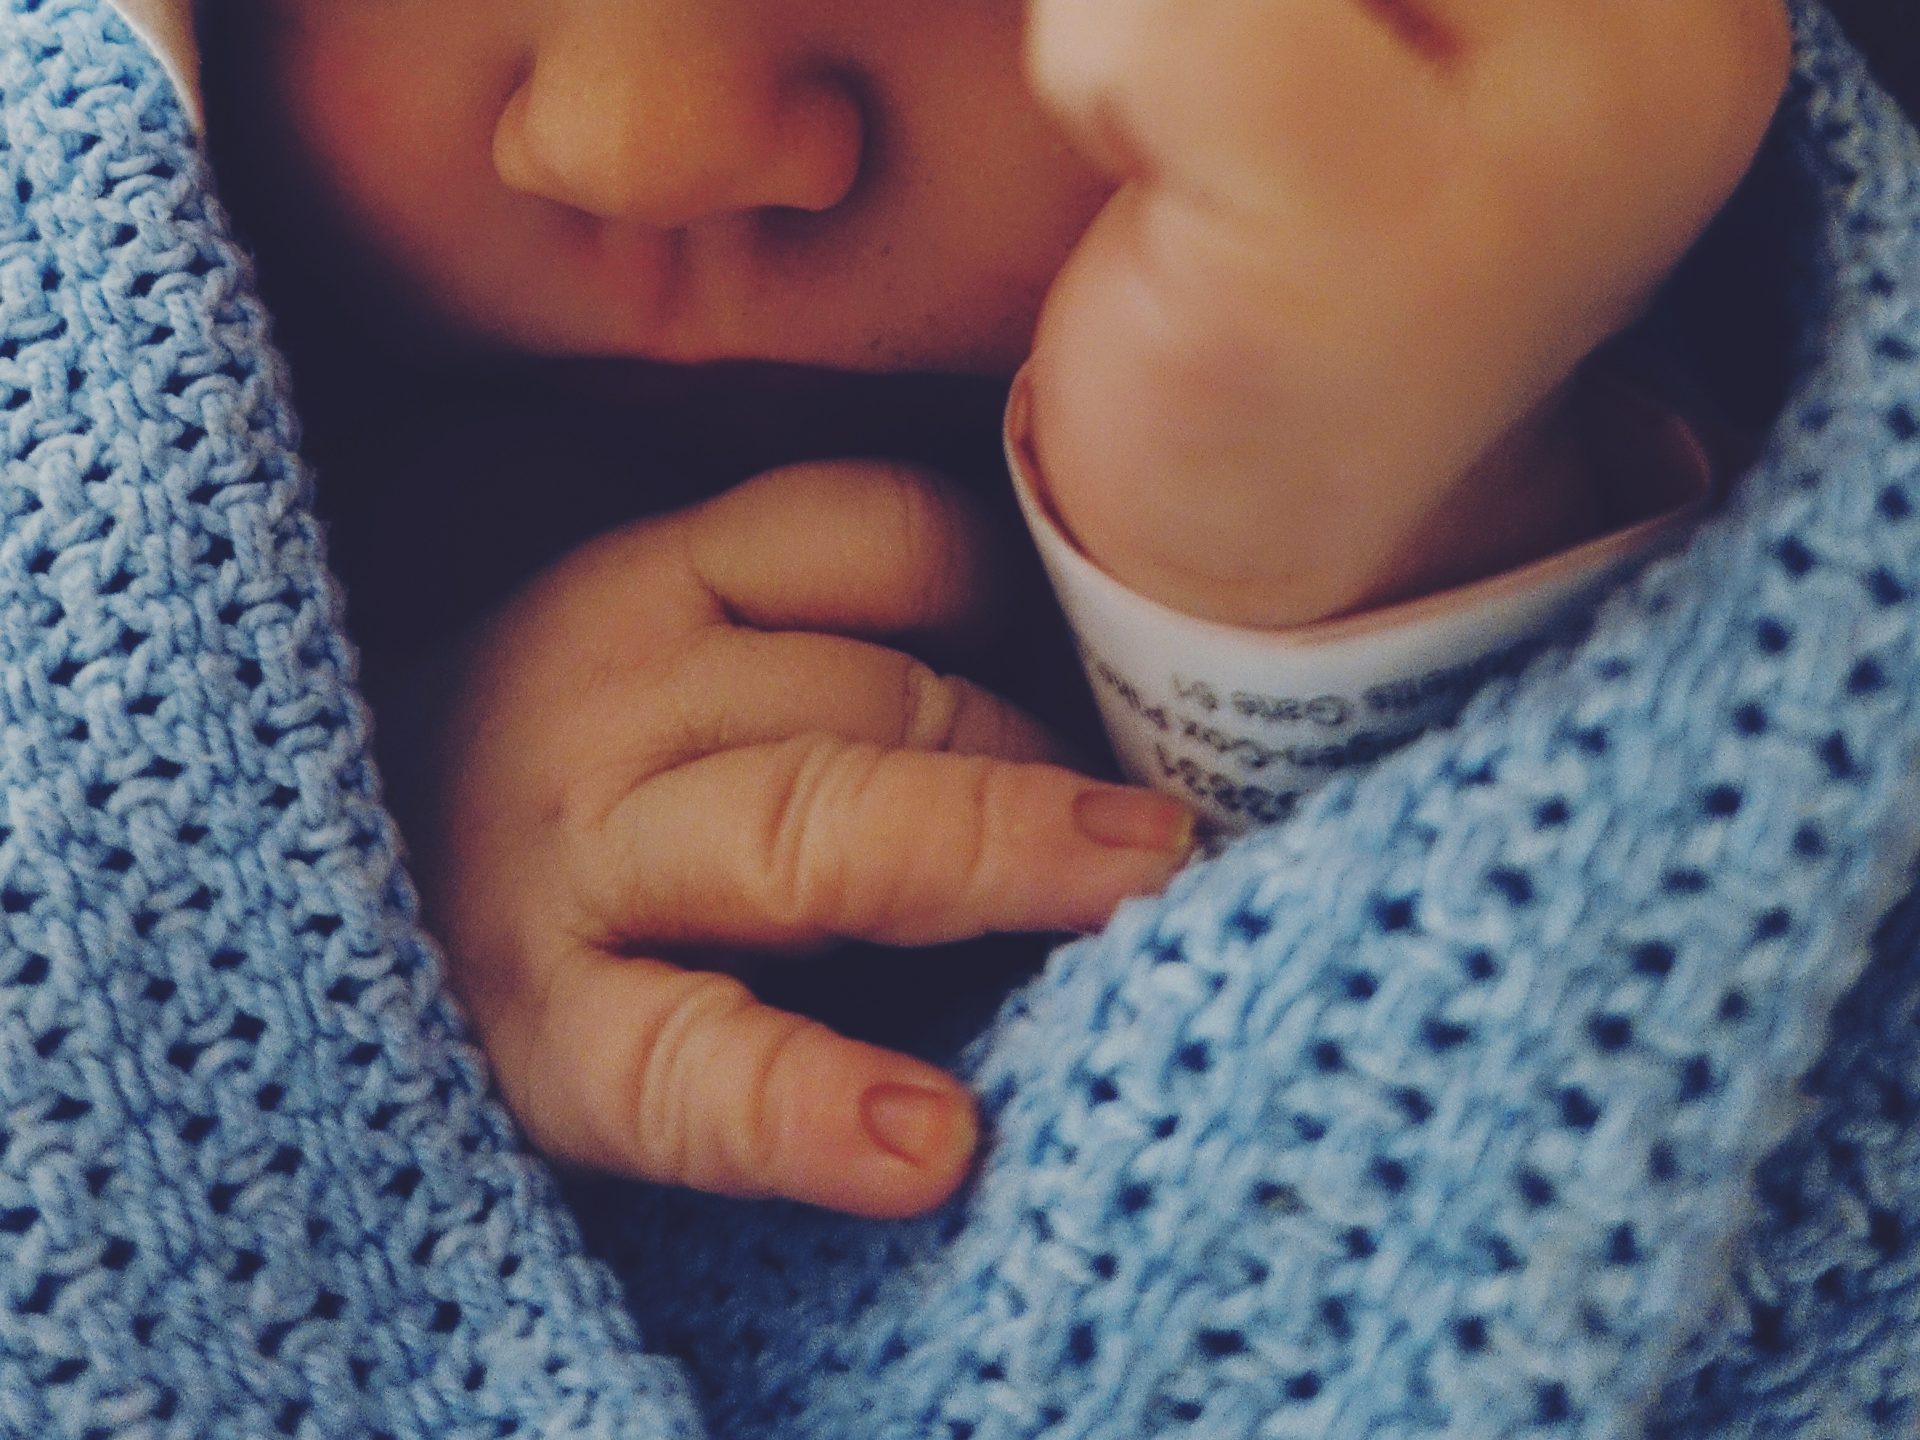 A close up photo of a baby, showing hands and nose and chin. The baby is wrapped in a blue blanket.